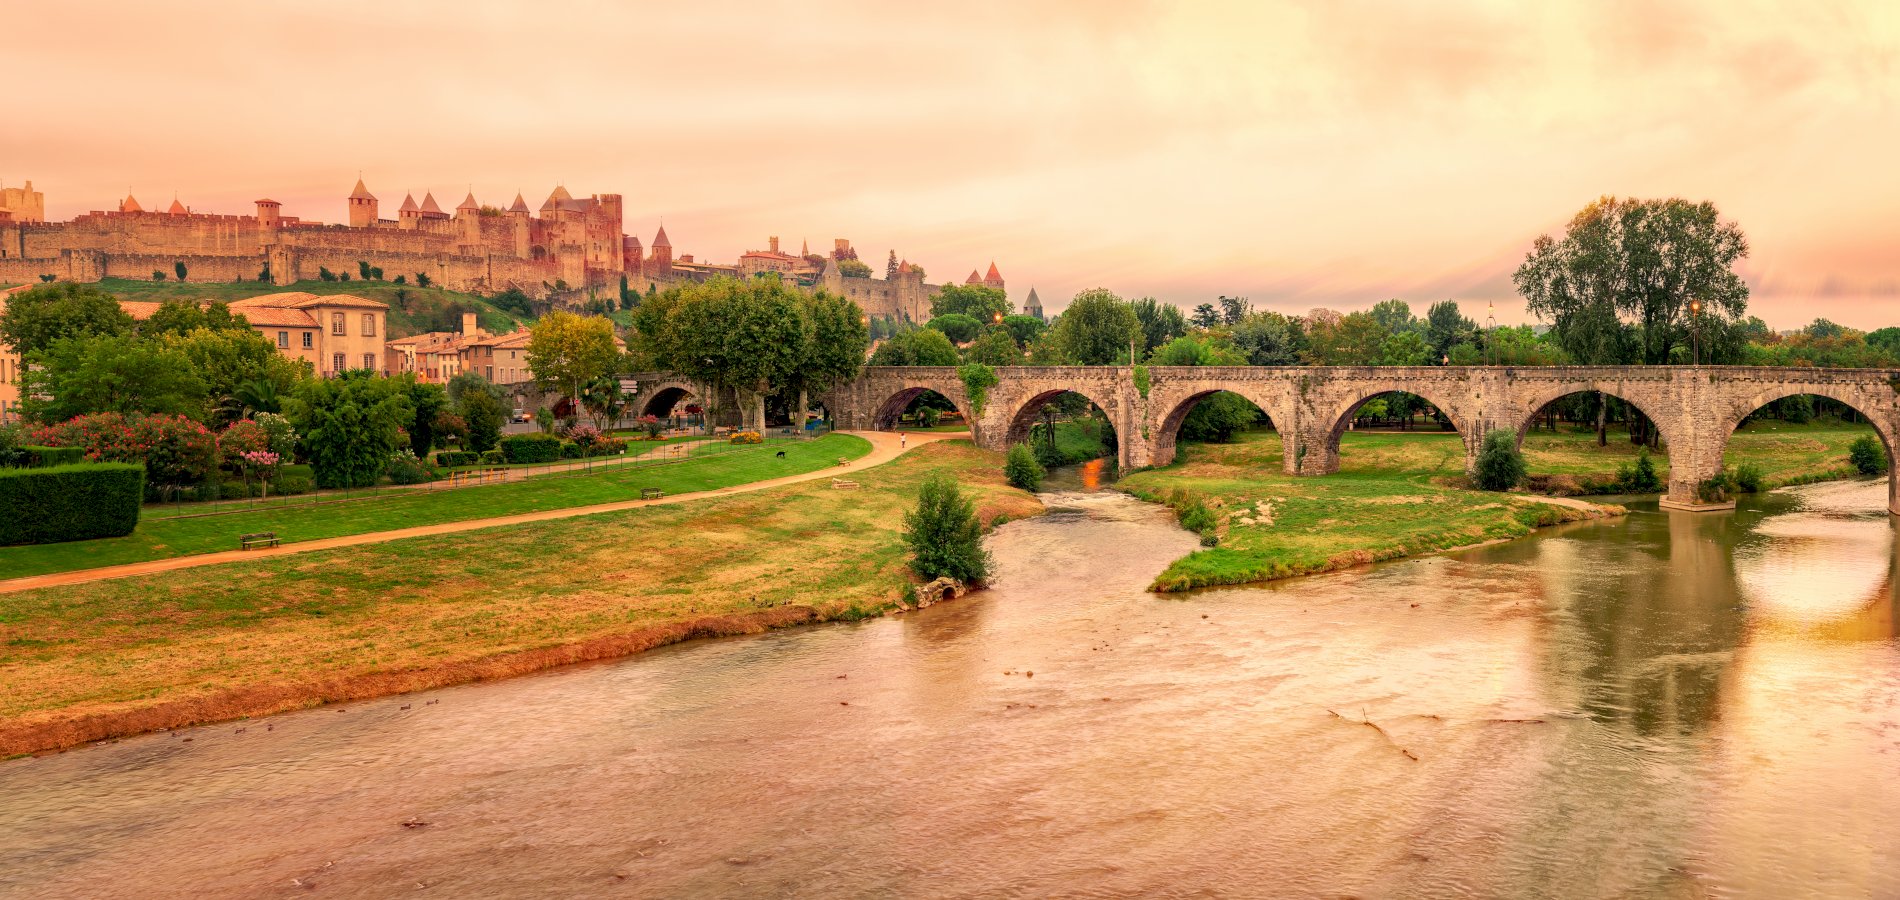 Ophorus Tours - Carcassonne Small Group Private Half Day Trip From Toulouse